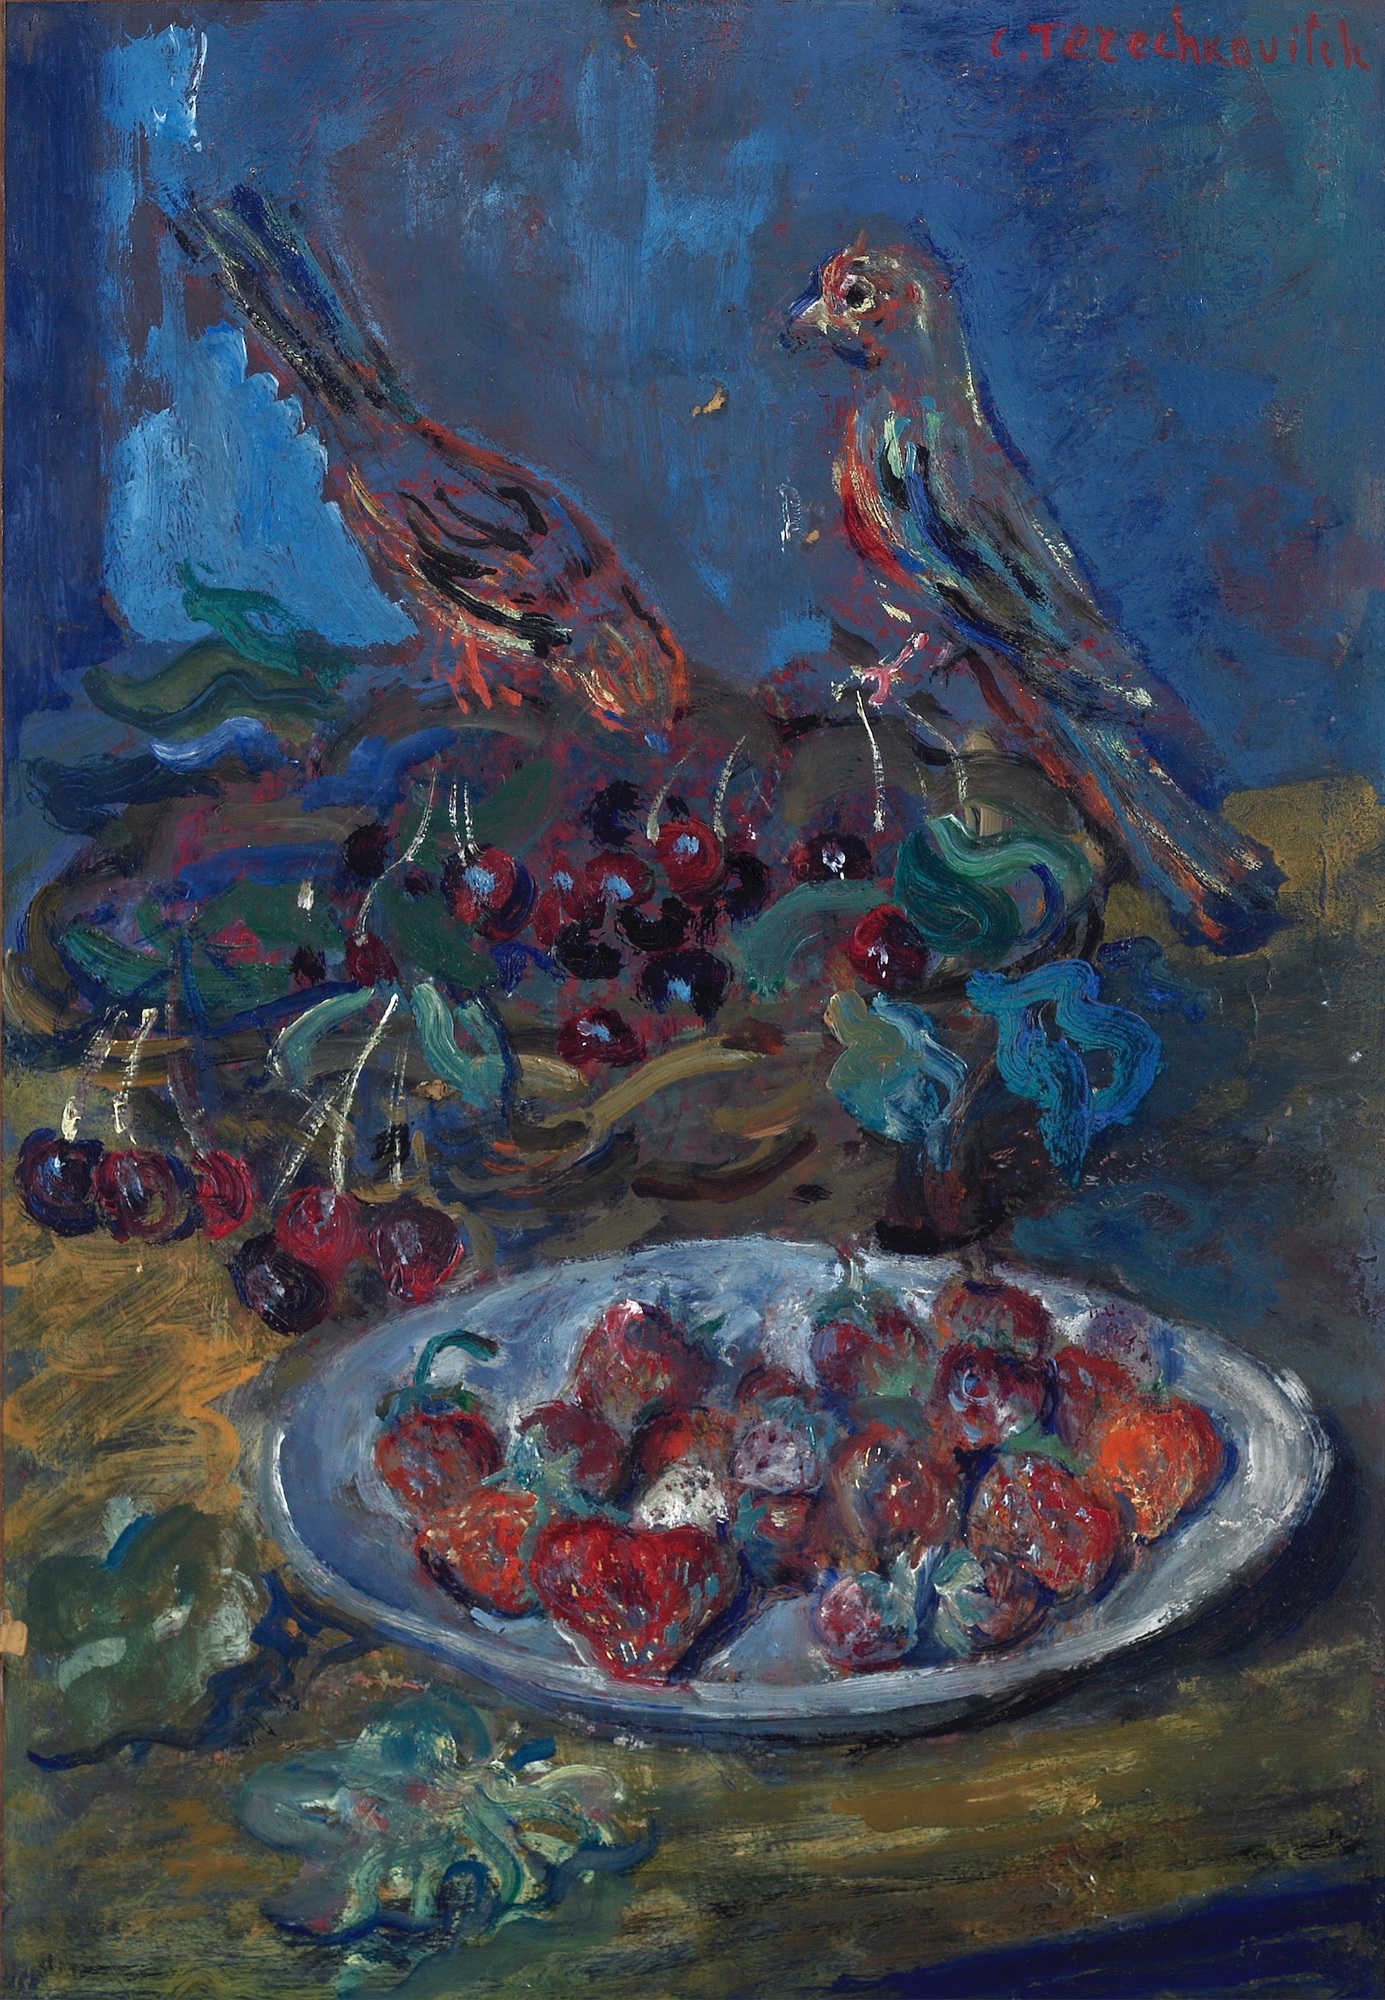 Stilll Life with Berries and Birds